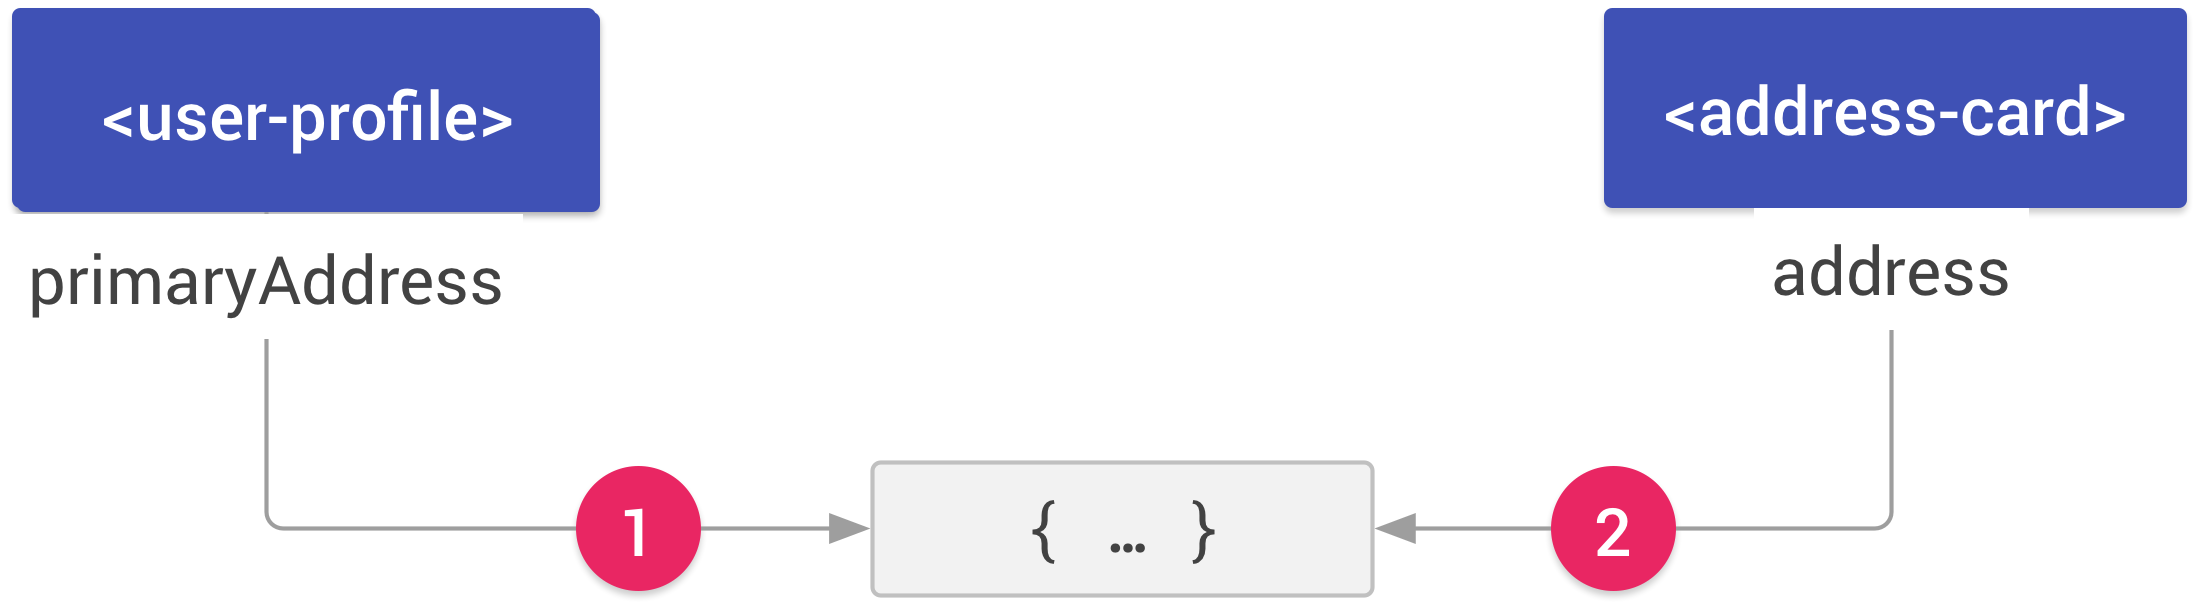 Two elements, user-profile and address card. The user-profile element has a primaryAddressproperty. An arrow labeled 1 connects the property to a JavaScript object. The address-cardelement has an address property. An arrow labeled 2 connects the property to the same JavaScriptobject.